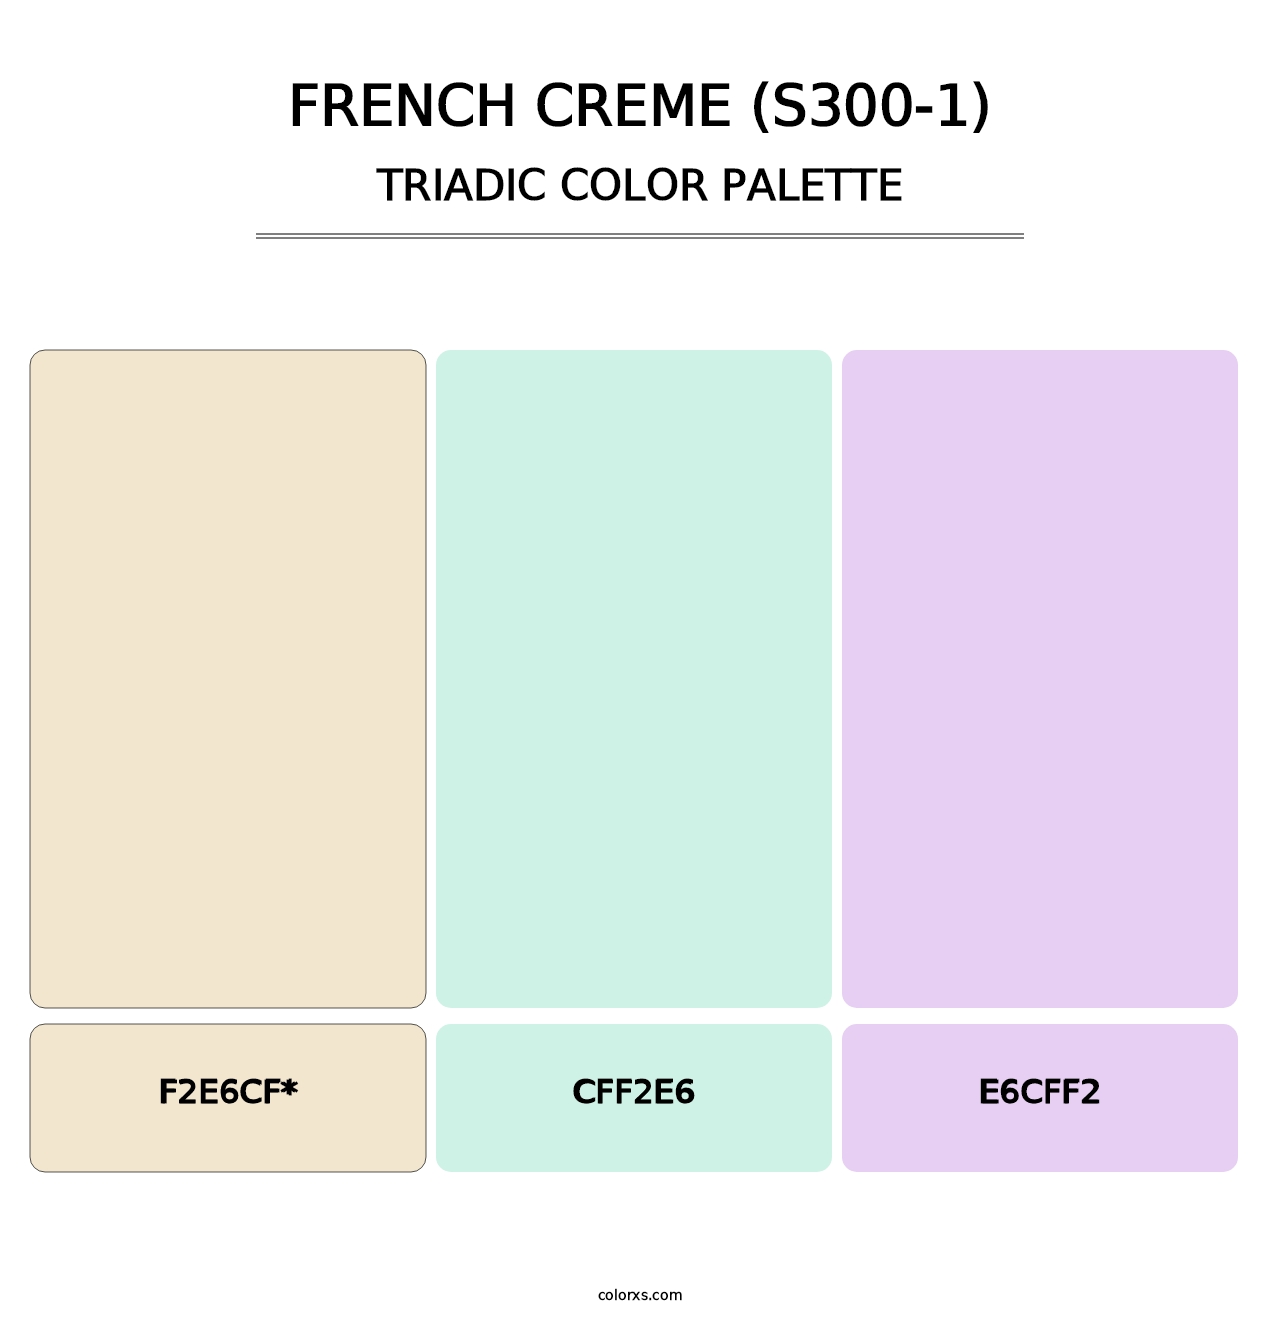 French Creme (S300-1) - Triadic Color Palette